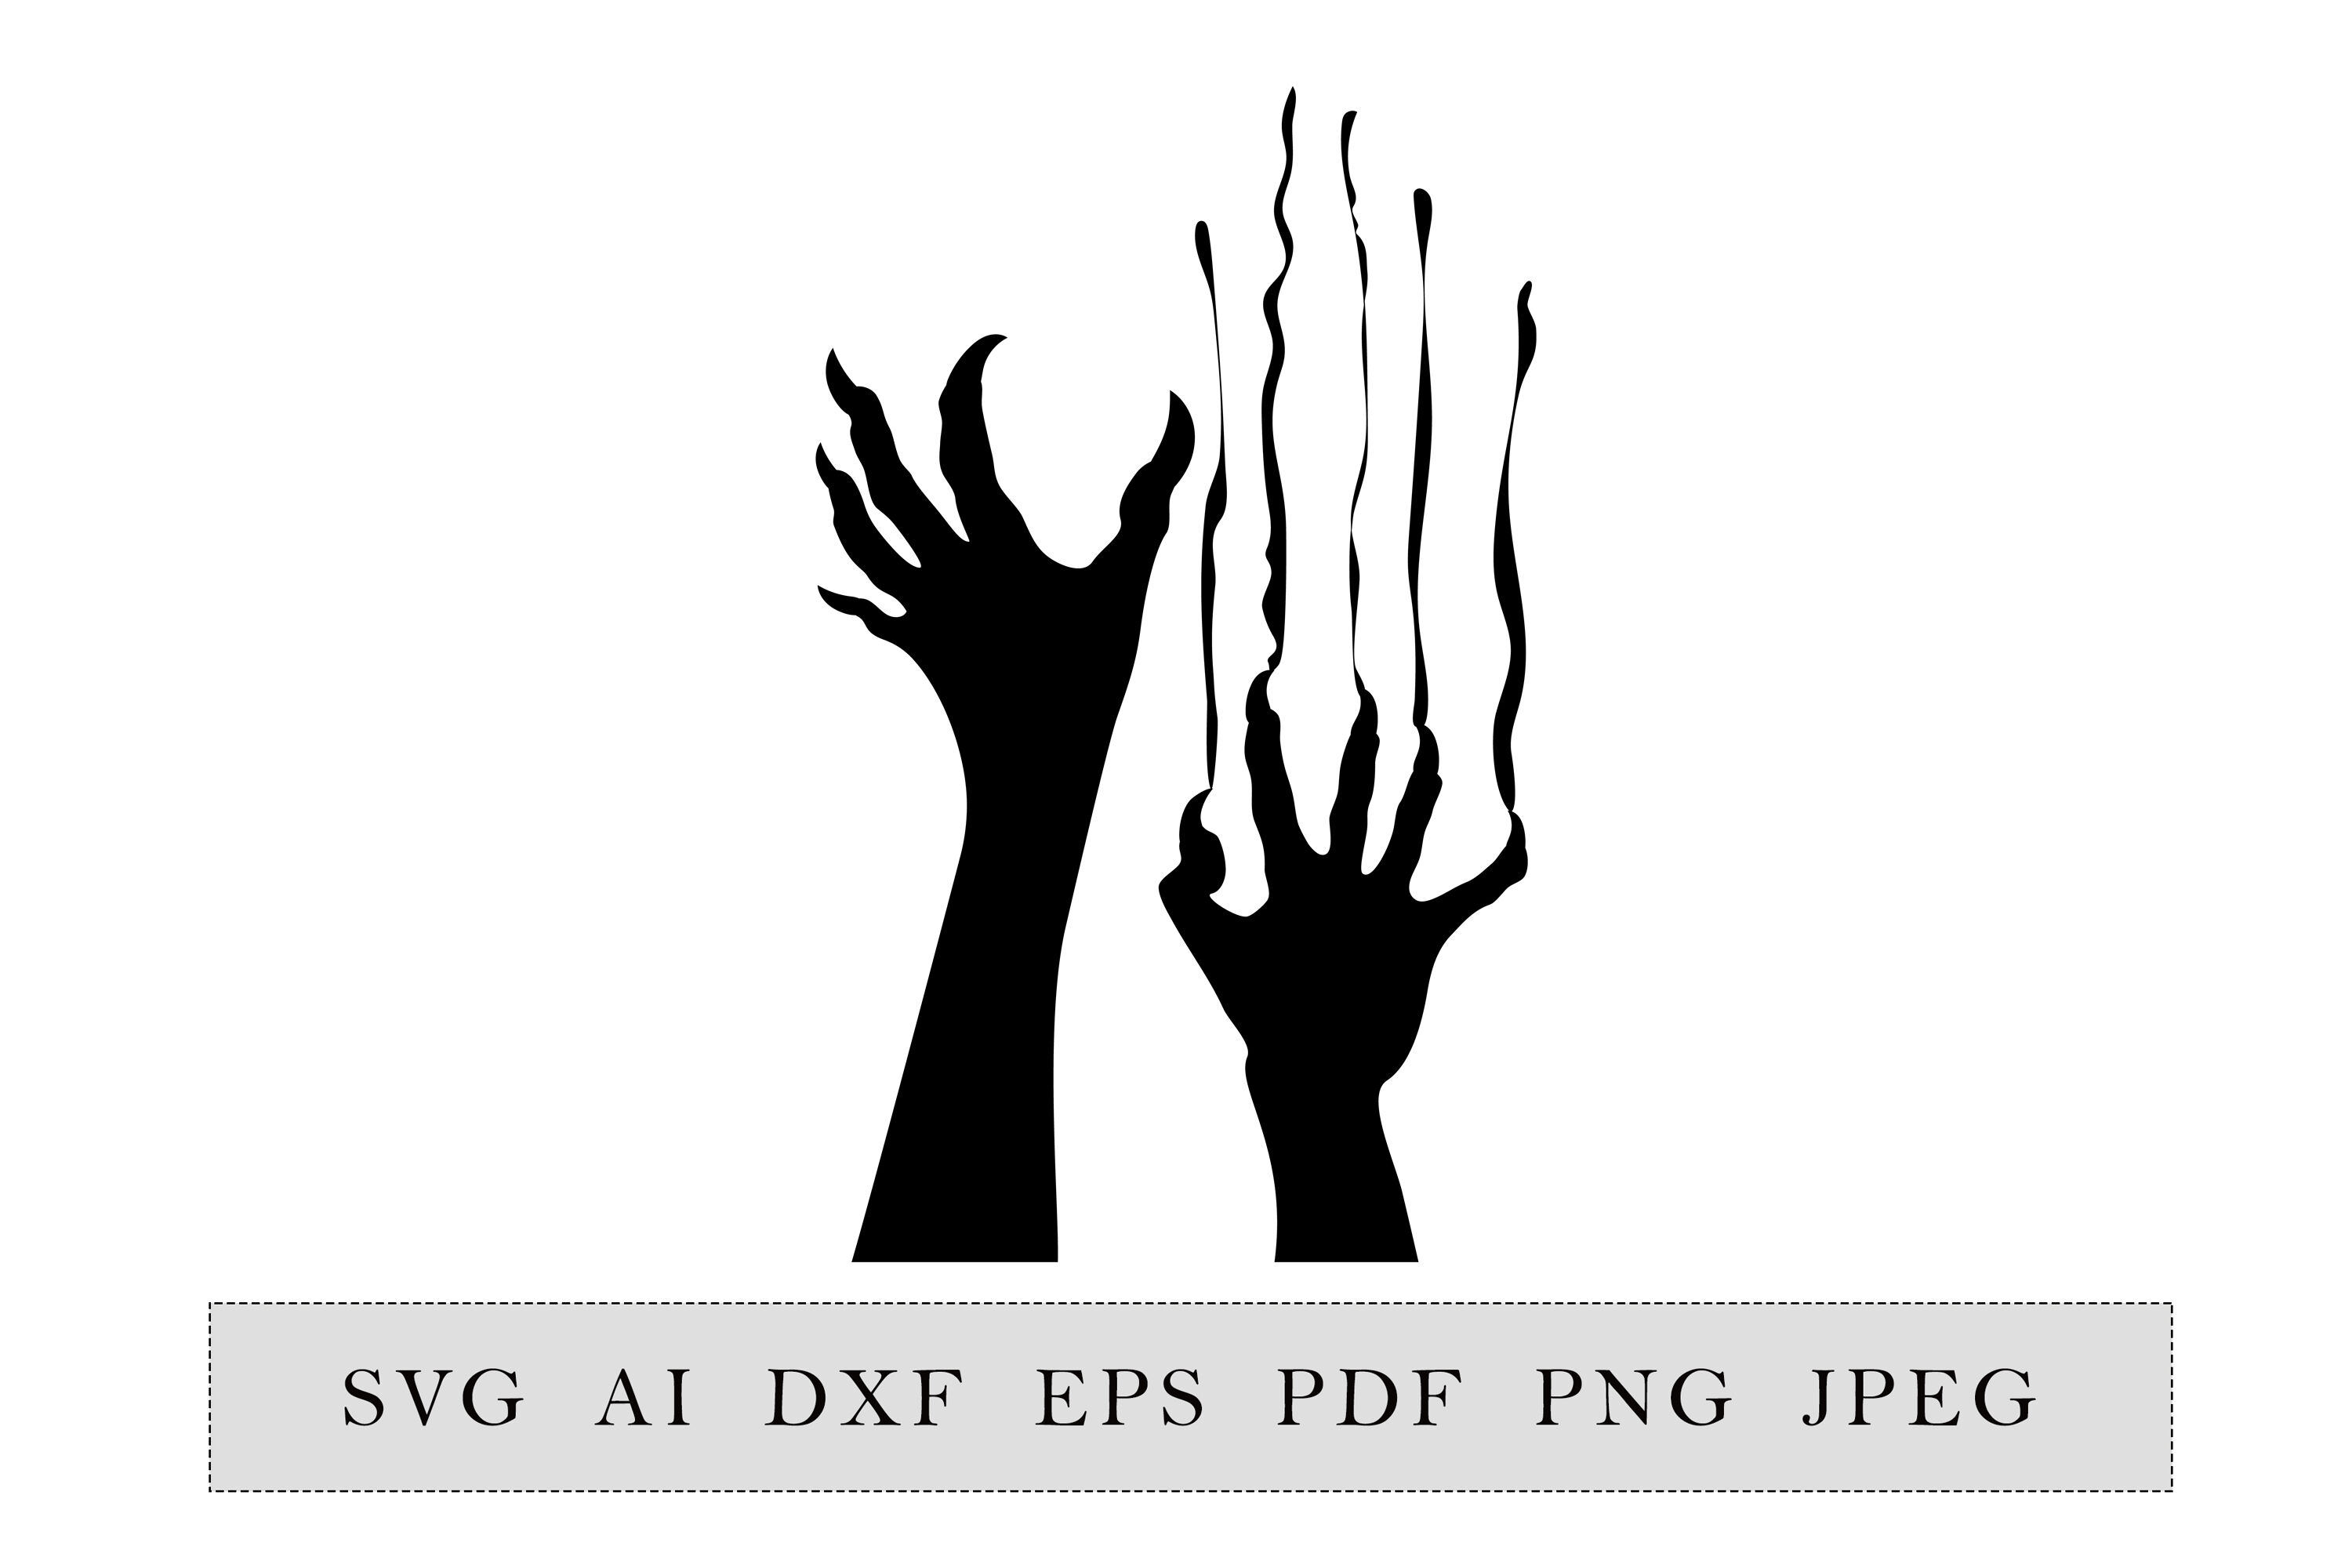 Zombie Hands Silhouette Halloween Party Decoration By Esha Thehungryjpeg Com